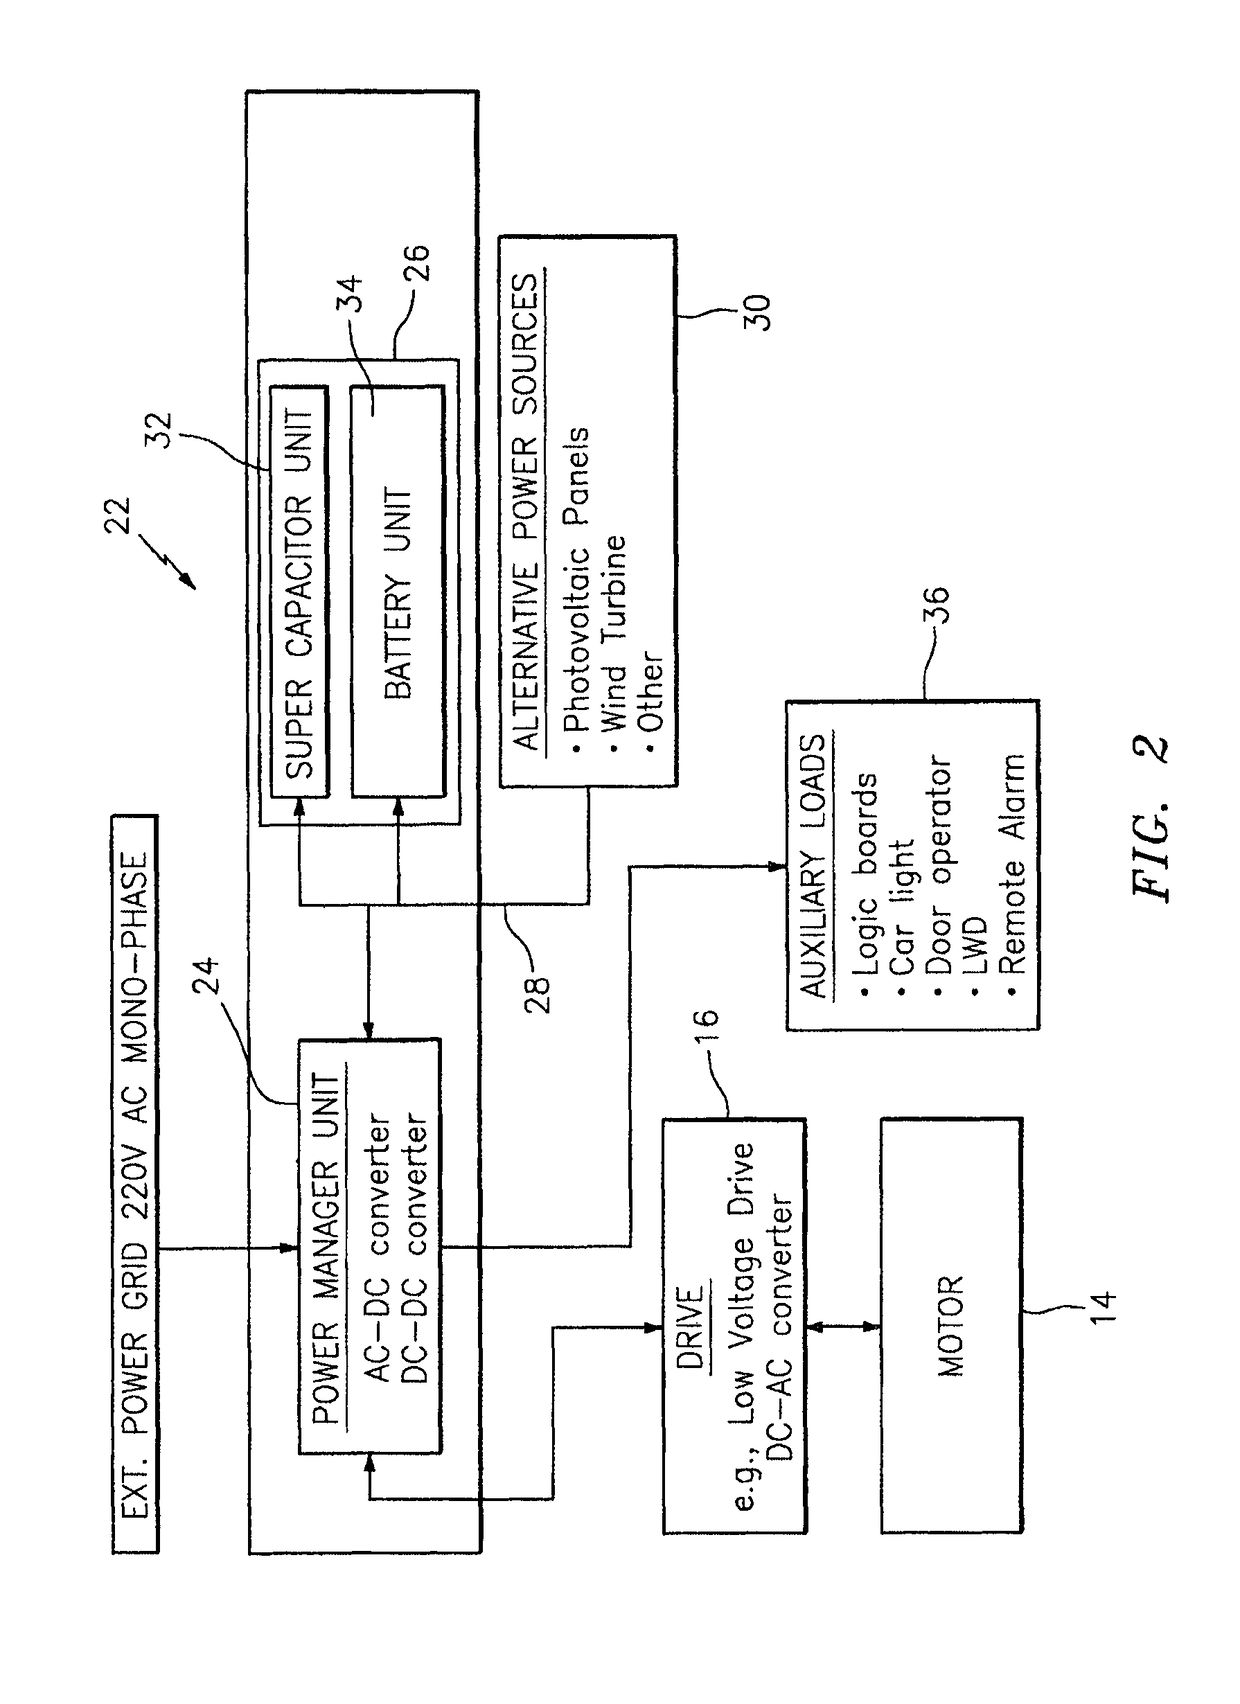 Elevator system including a power storage device with a supercapacitor unit and a battery unit